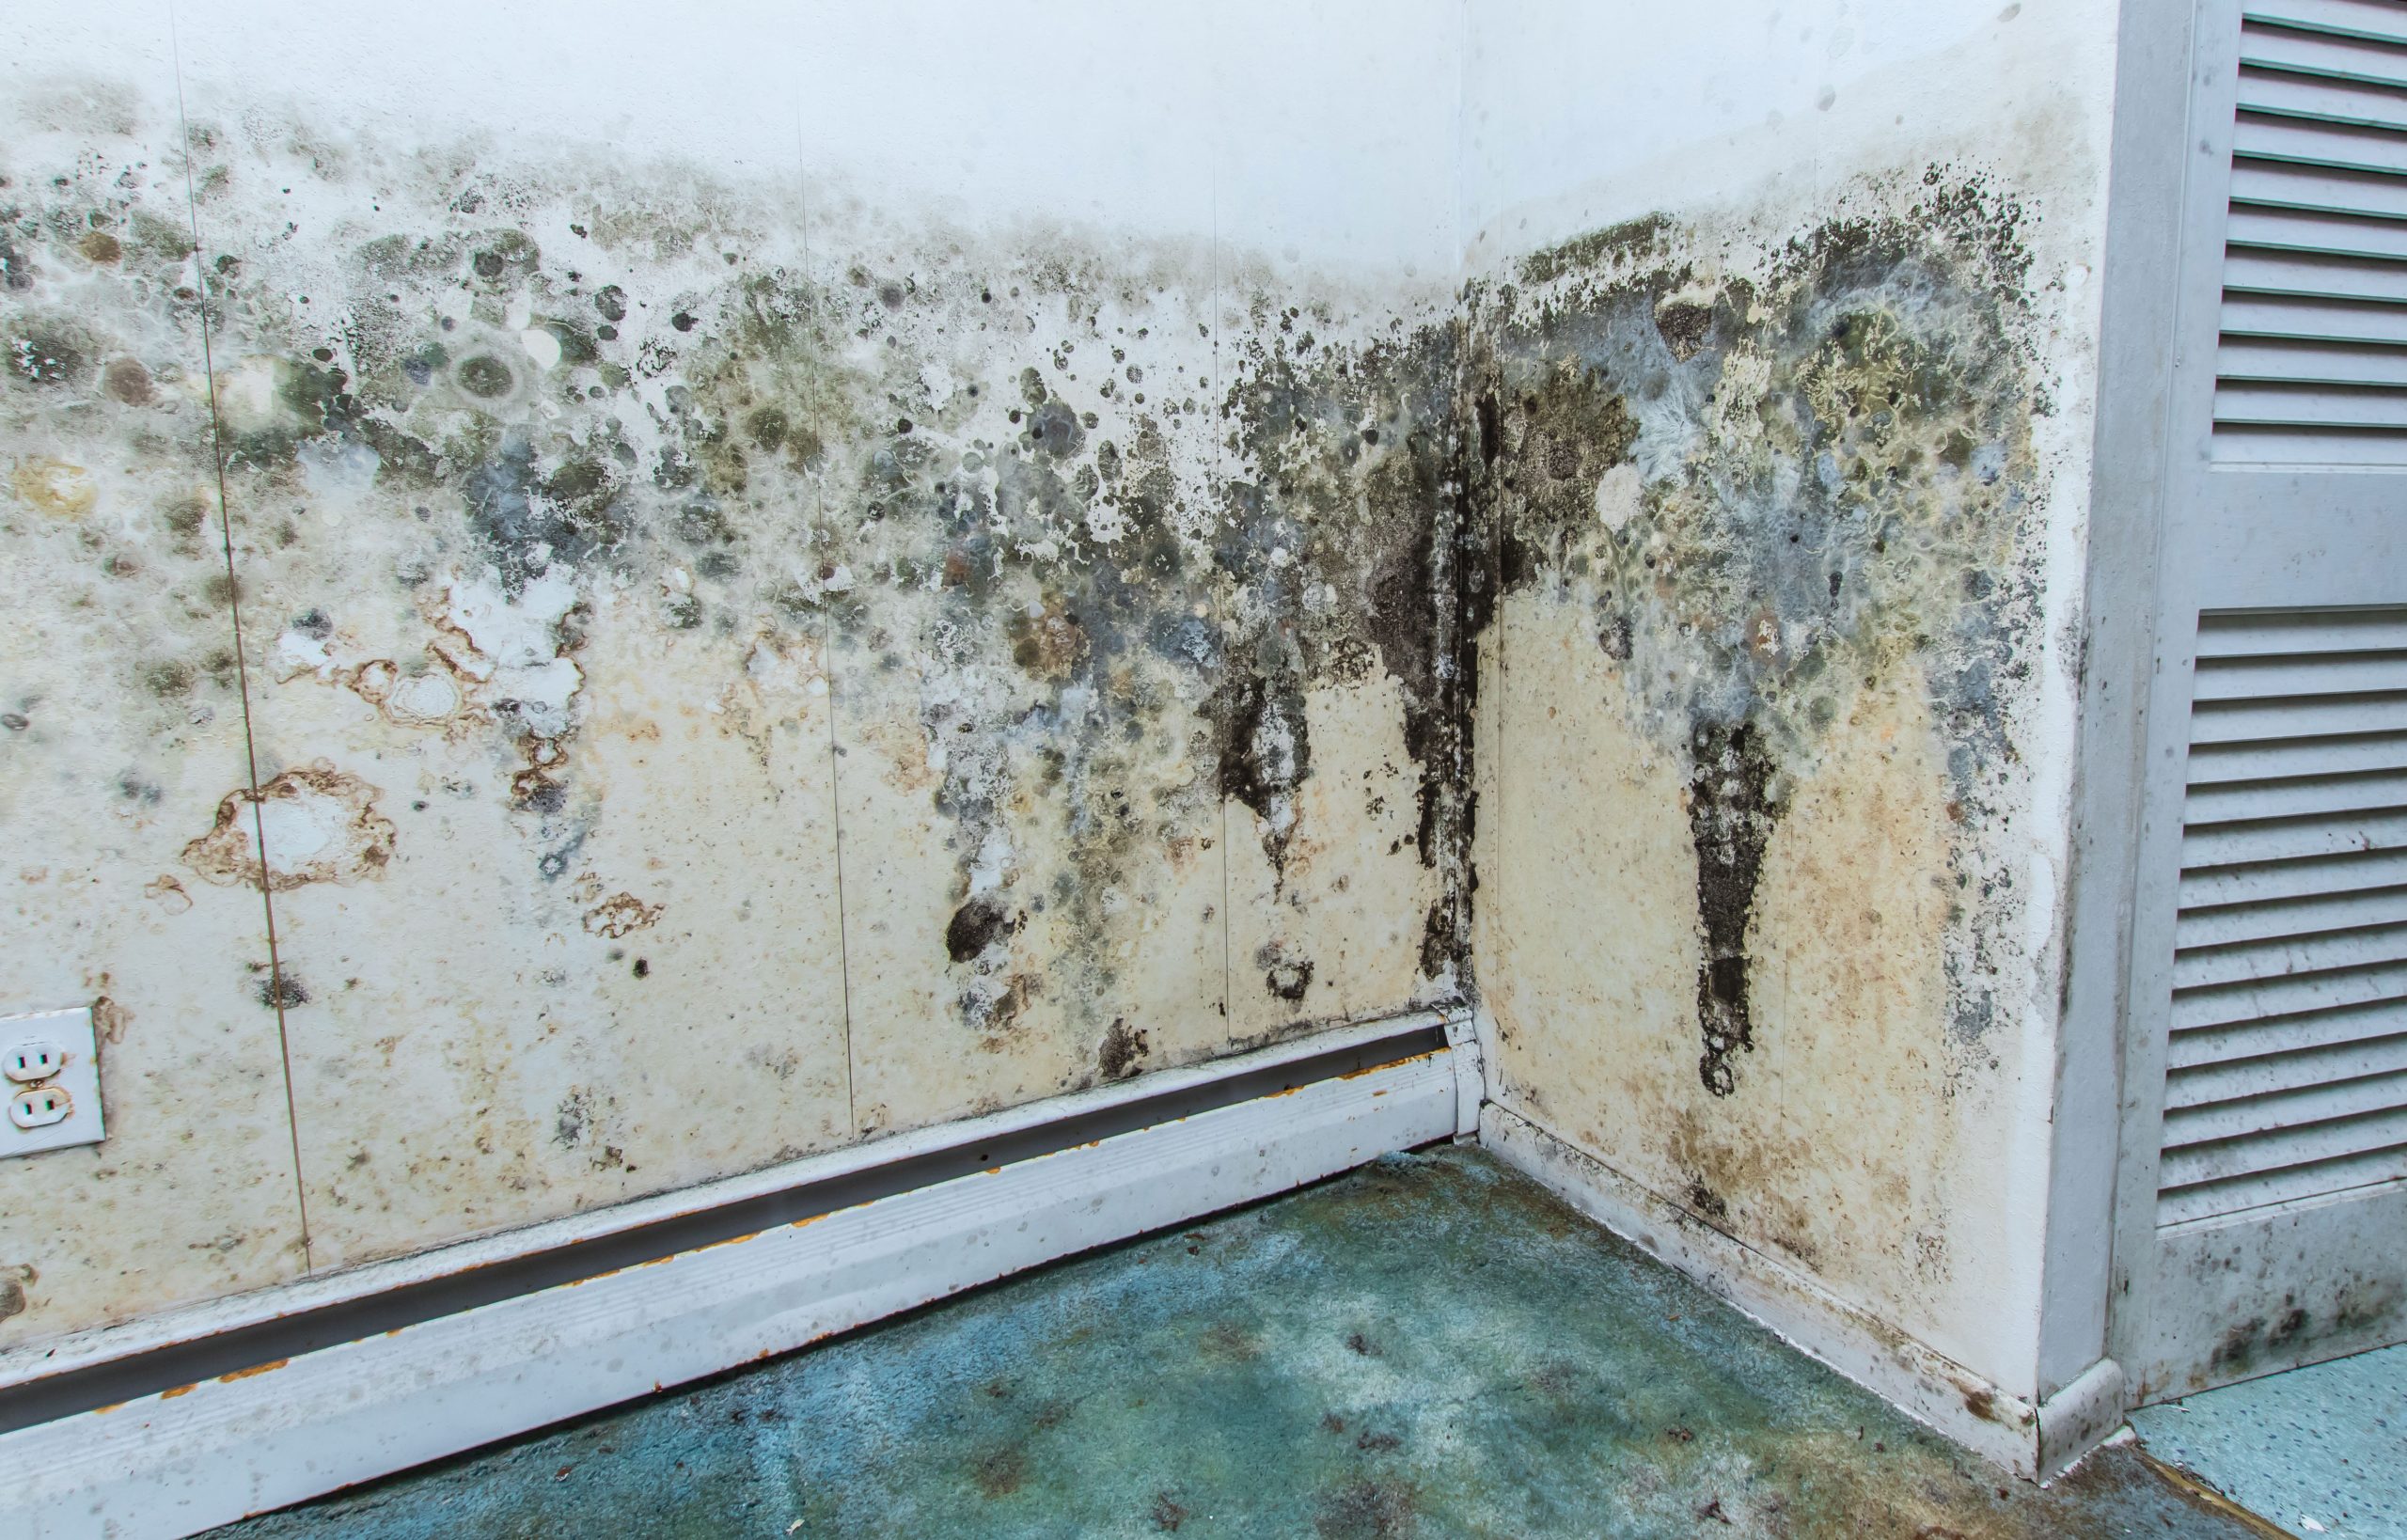 Black mold remediation services on an interior dining room wall.